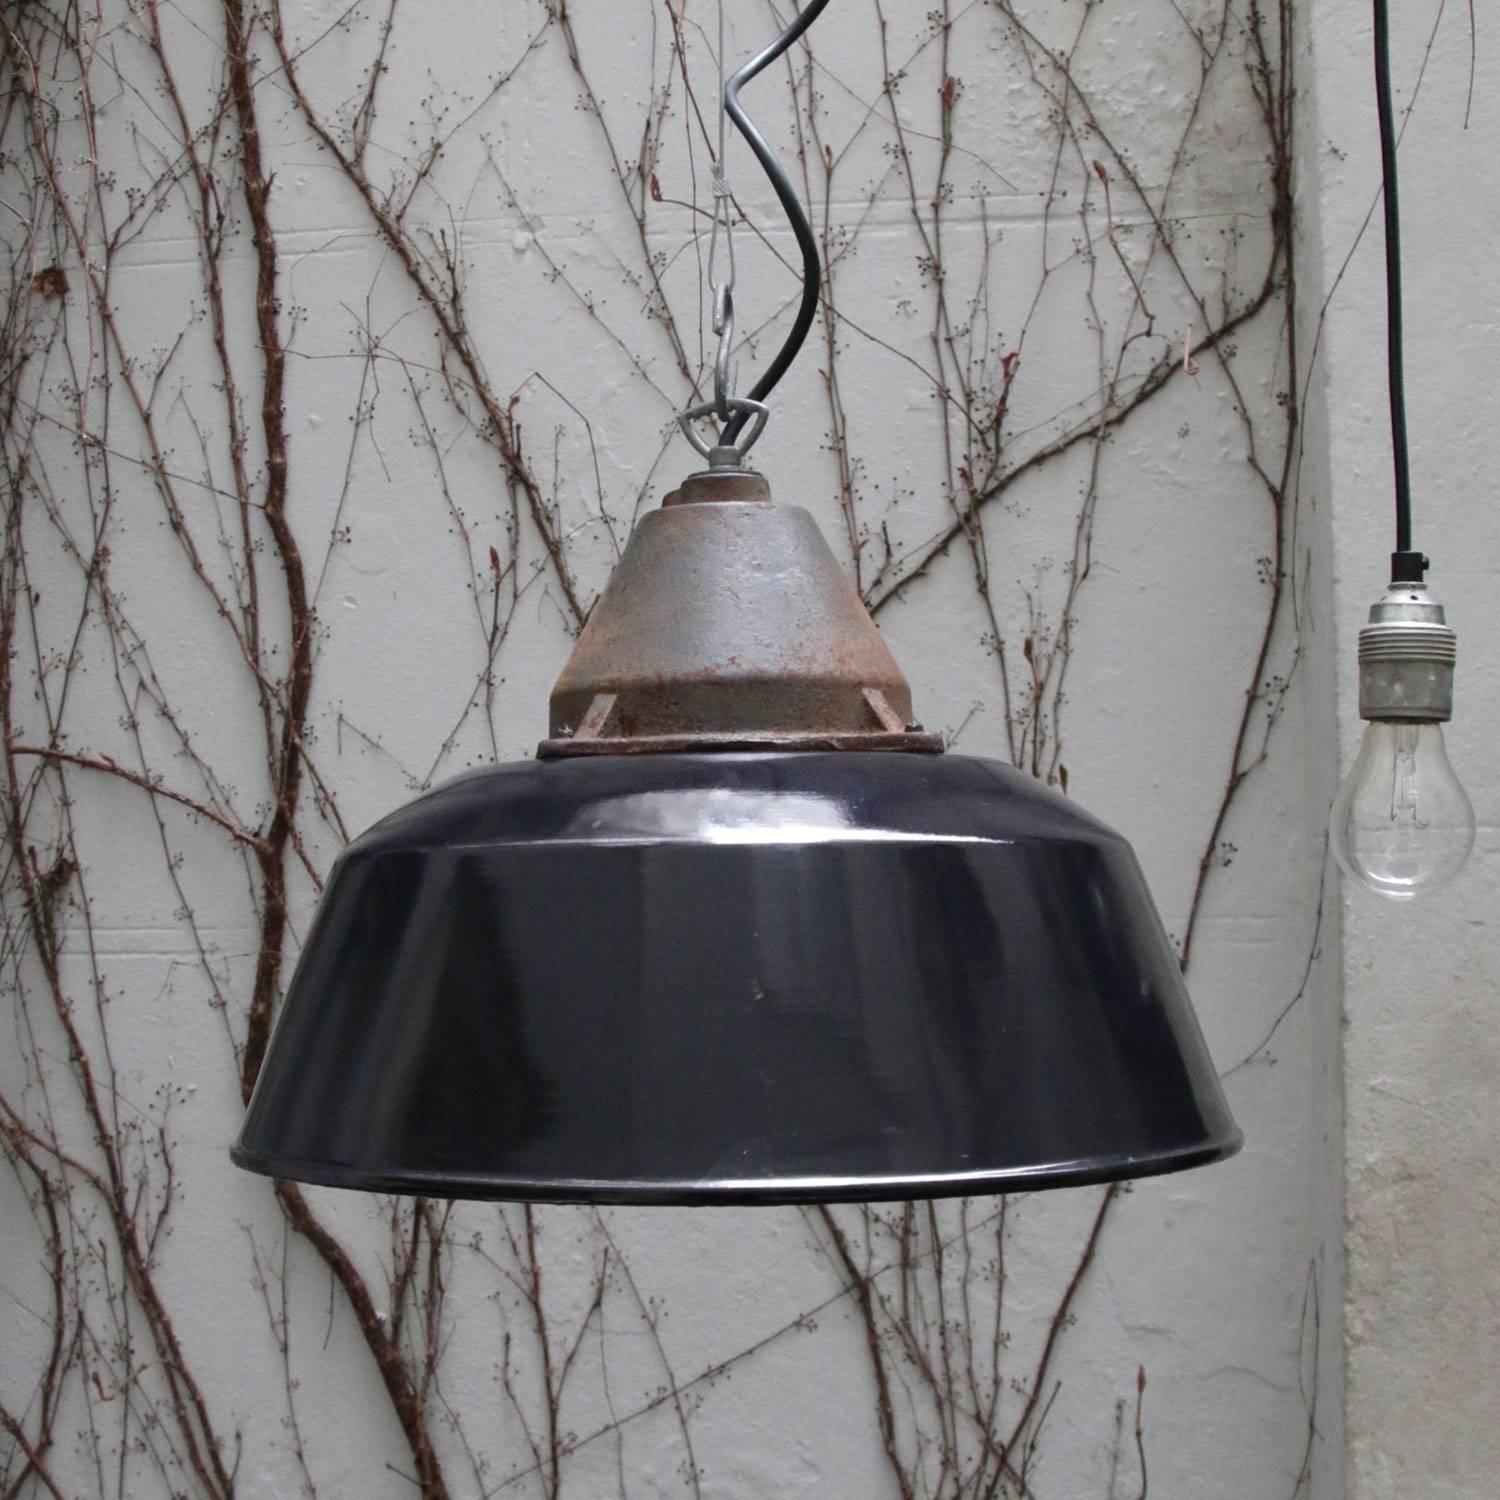 Factory hanging lamp. Black enamel white interior. Cast iron top.

Weight: 5.0 kg / 11 lb

Priced per individual item. All lamps have been made suitable by international standards for incandescent light bulbs, energy-efficient and LED bulbs. E26/E27